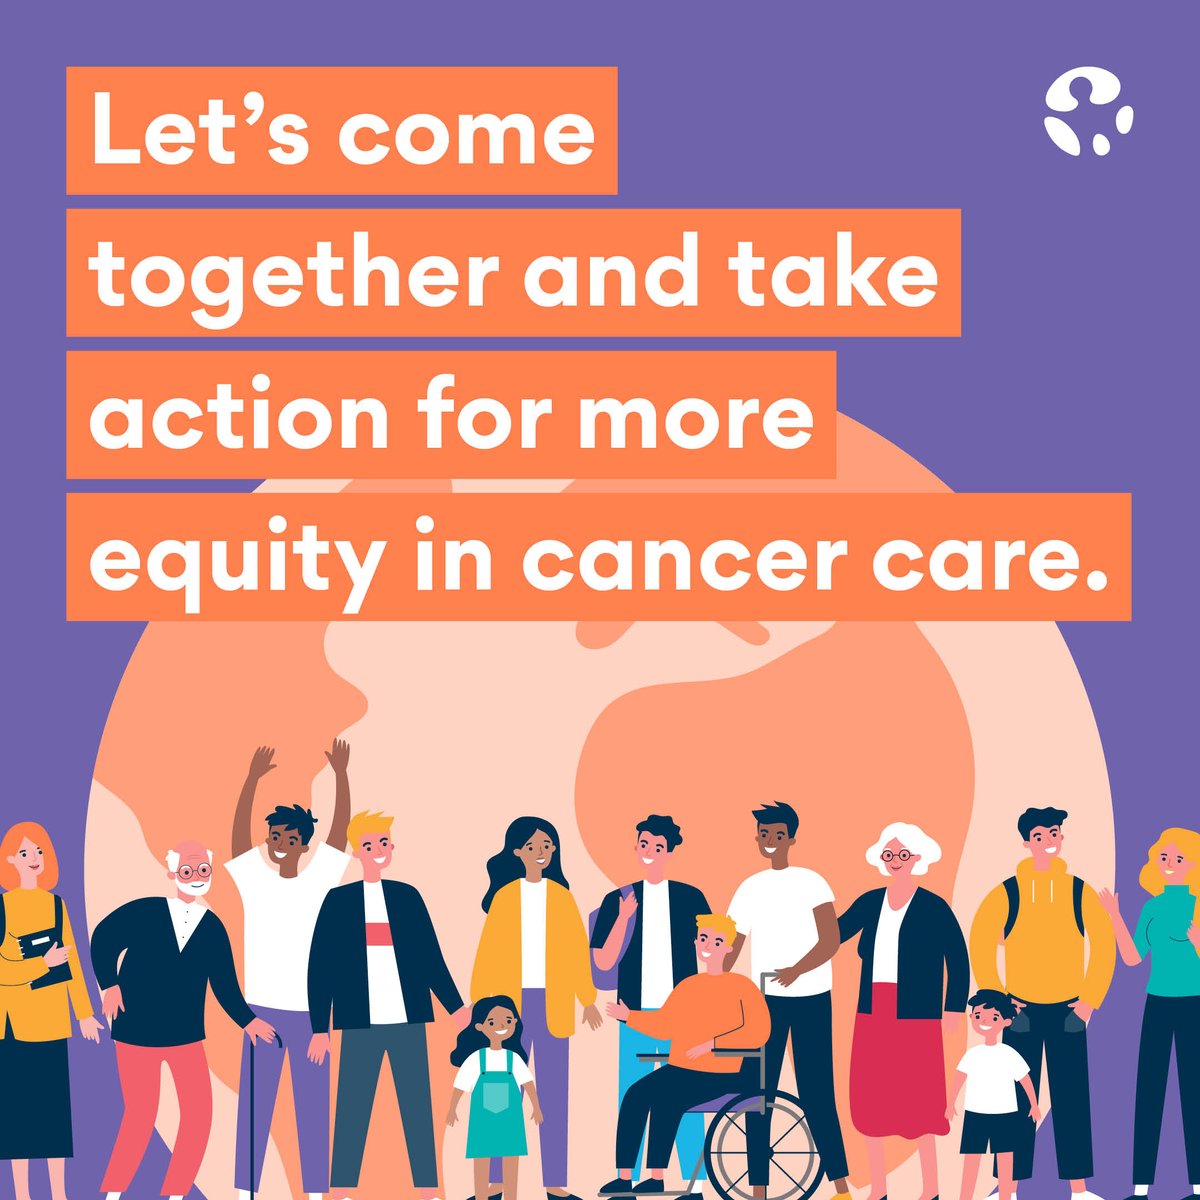 Today is World Cancer Day! Add your voice to the call for equity in cancer care. Working together with organisations like @uicc can have the greatest impact on improving patient outcomes for people with kidney cancer. #kidneycancer #KCSM #ClosetheCareGap worldcancerday.org/join-call-to-a…